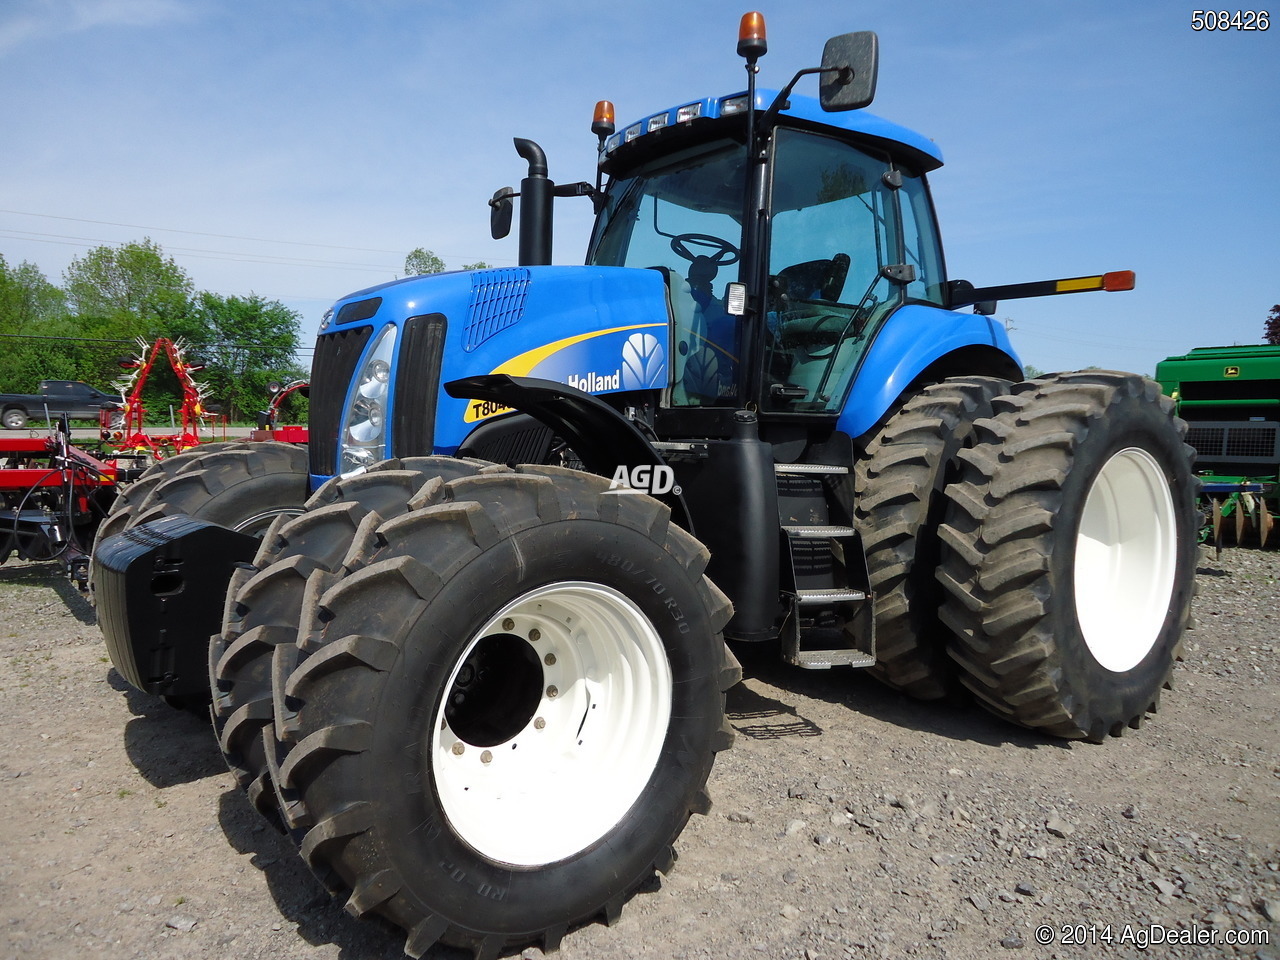 2009 New Holland T8040 Tractor For Sale | AgDealer.com